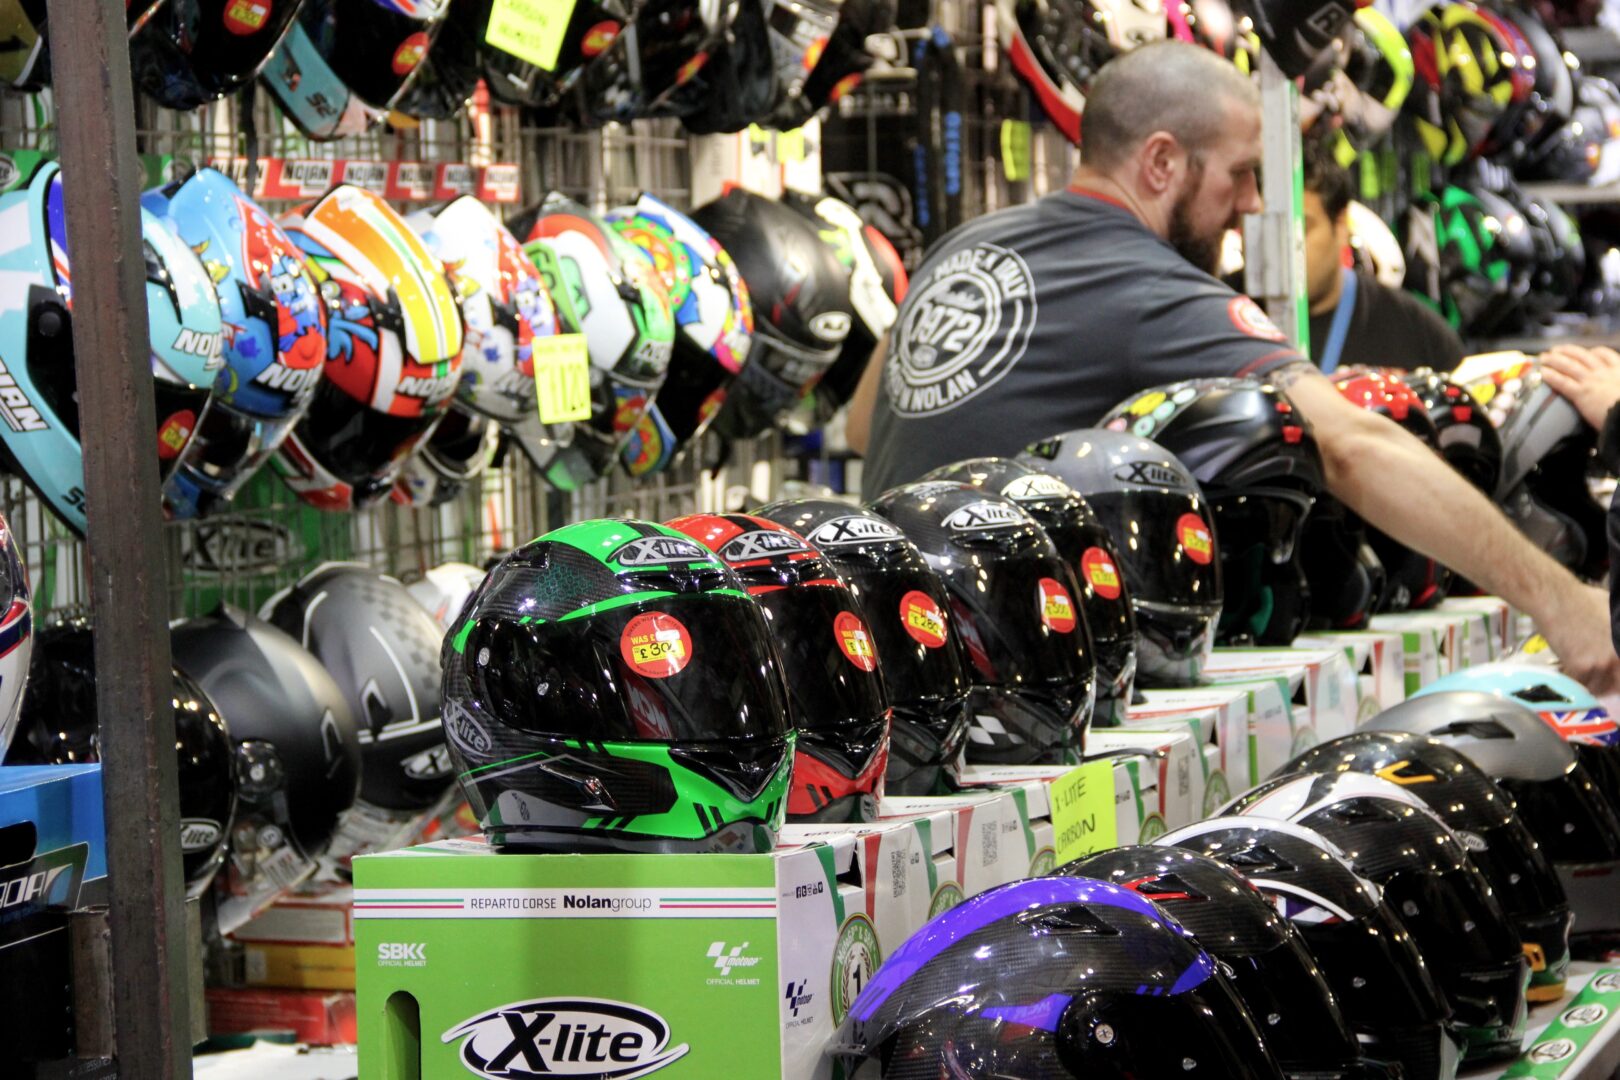 Motorcycle Helmets for sale on Exhibition stand at the Scottish Motor Cycle show.